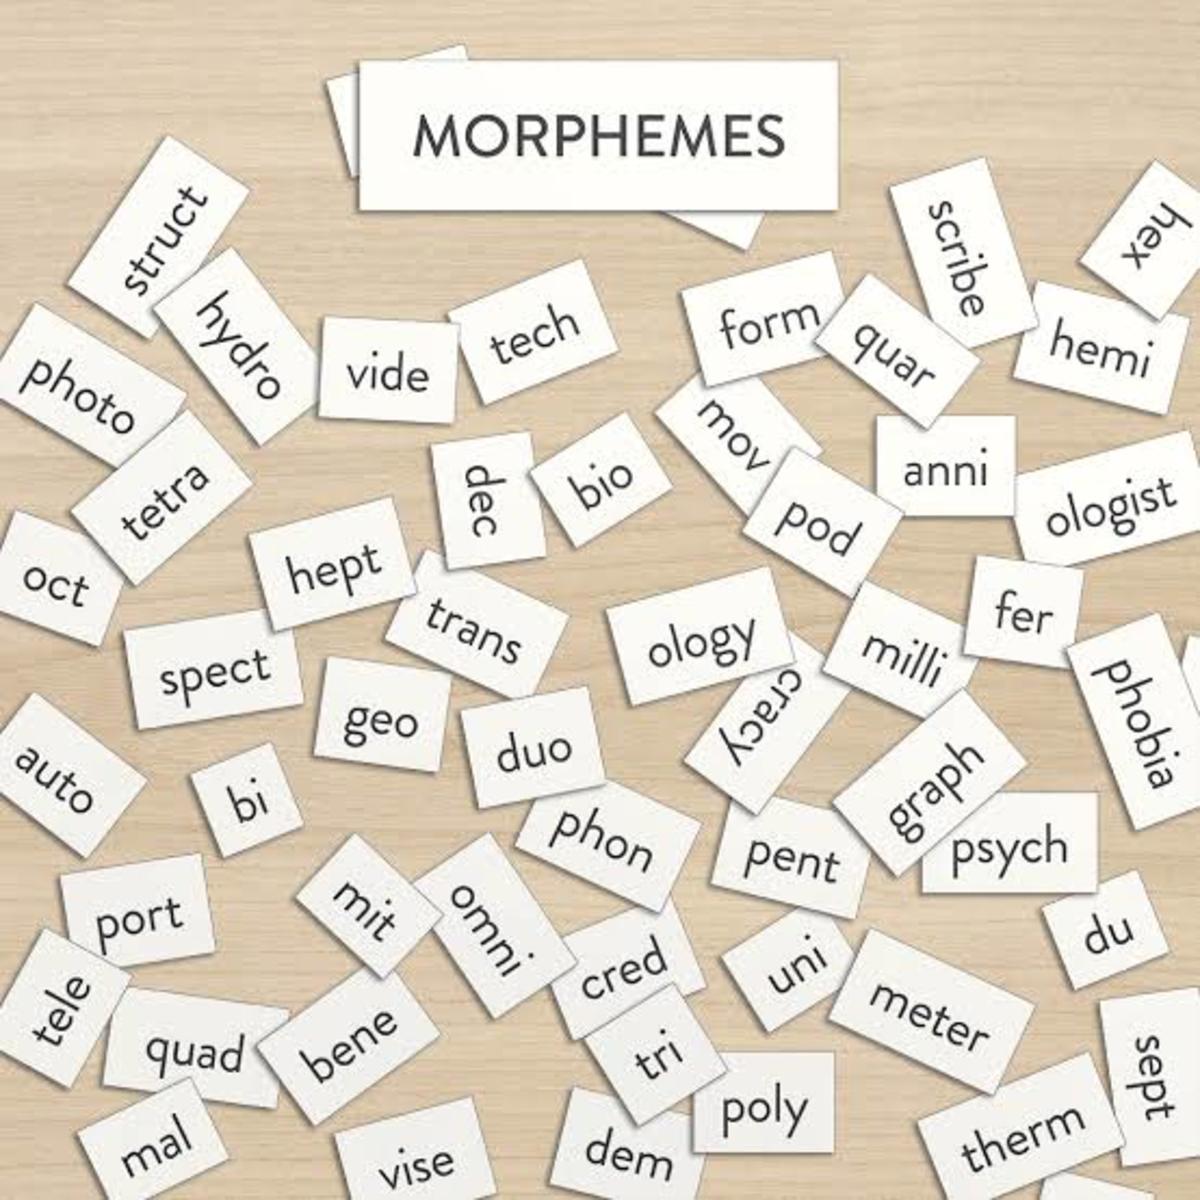 Read on to learn all about morphemes. You'll also find a plethora of helpful examples!